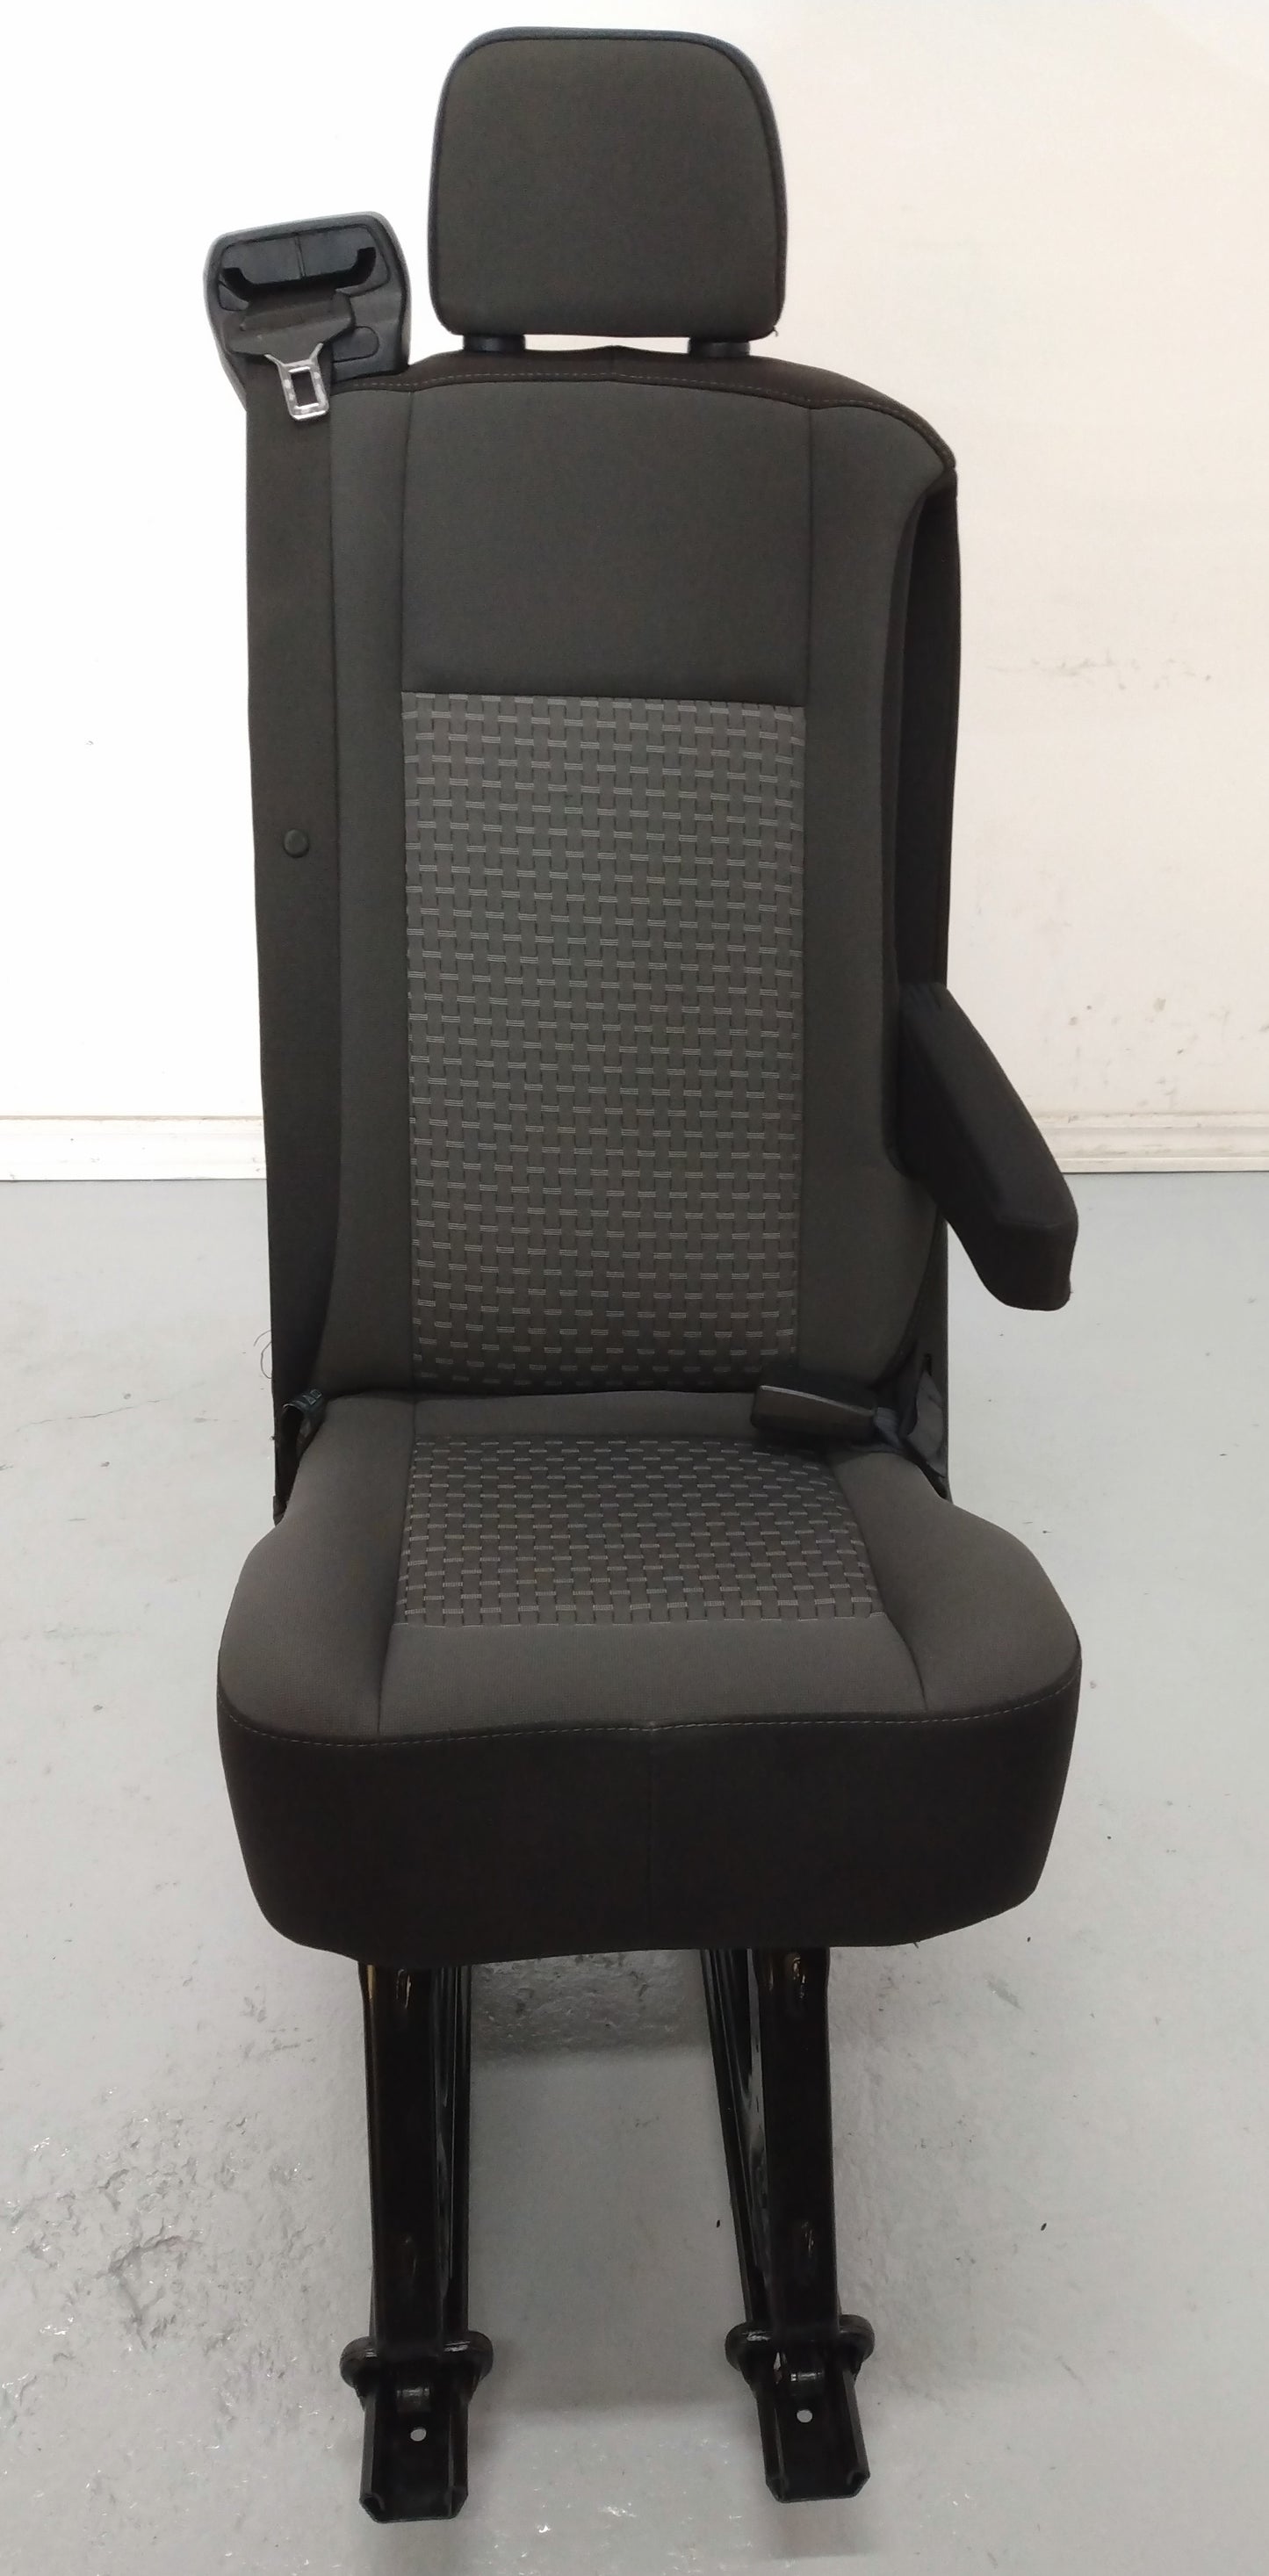 Ford Transit van 2022 black cloth removable single seat with recline and armrest. quick release universal fit. custom install 